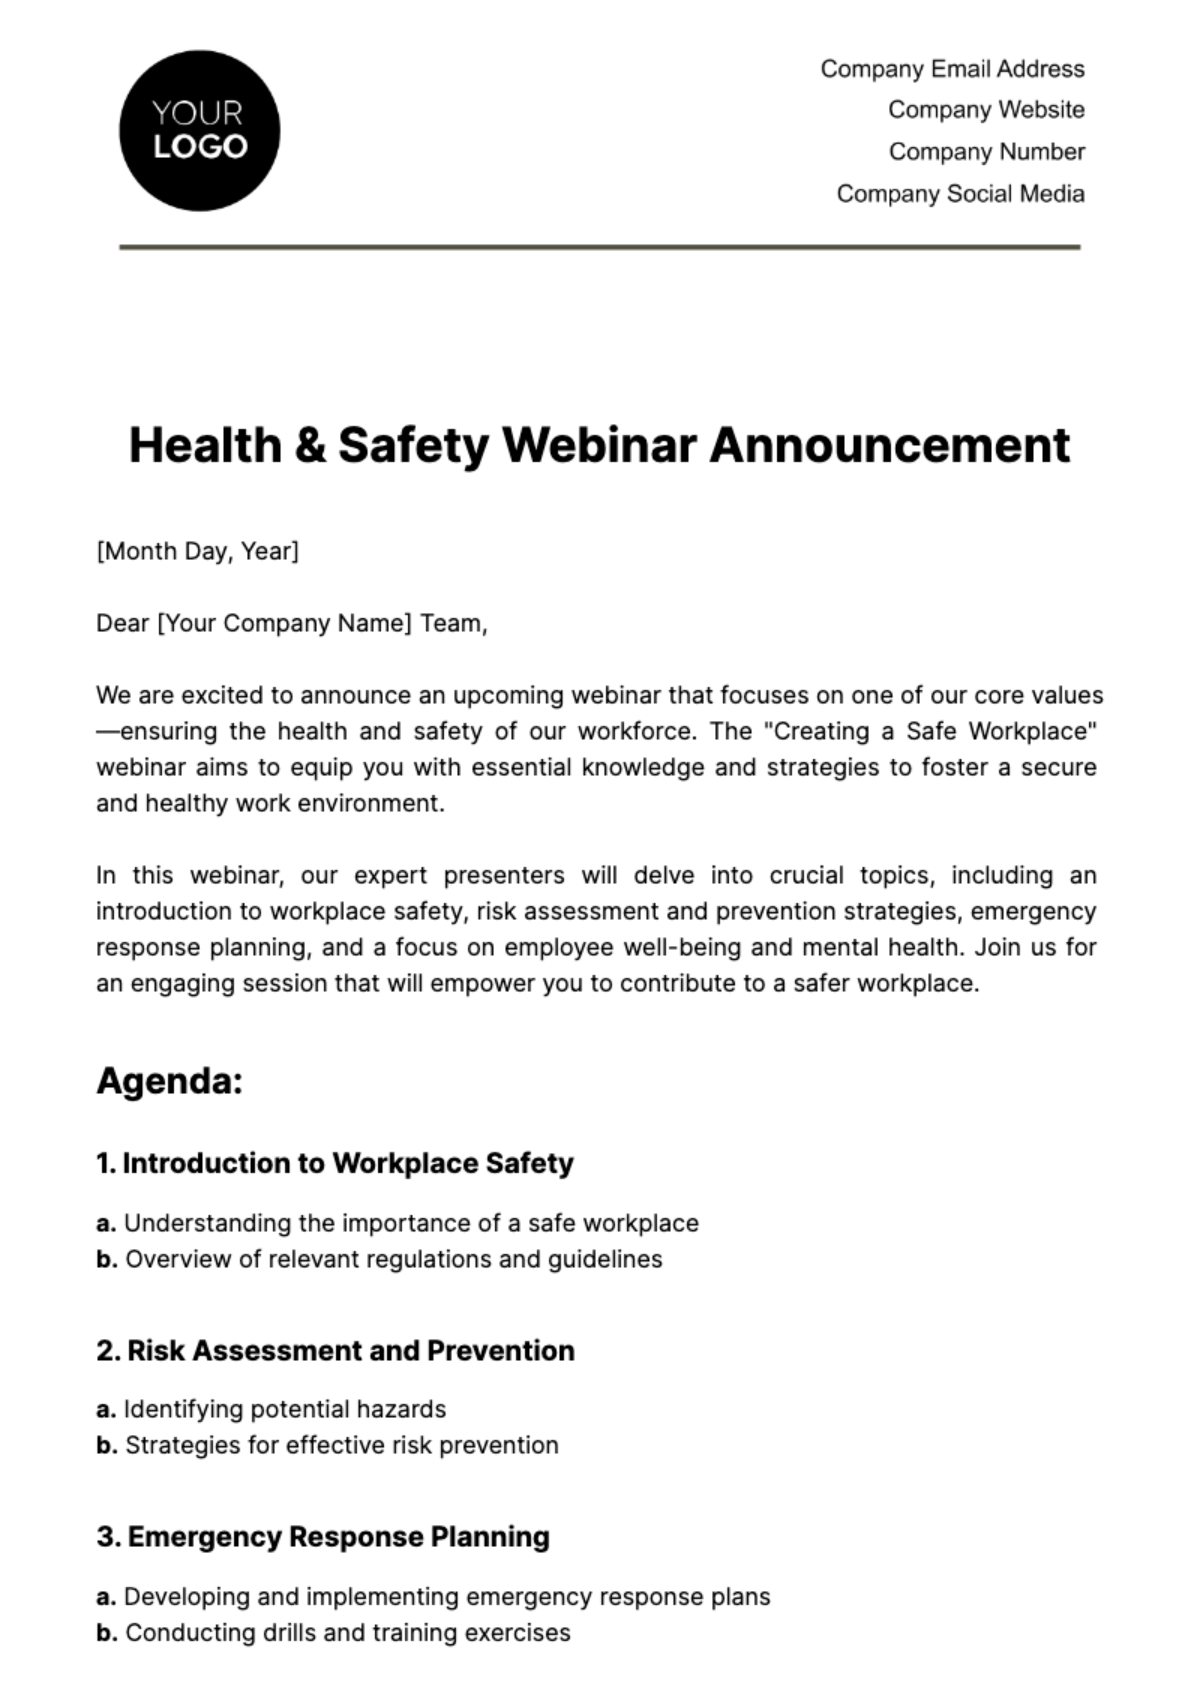 Free Health & Safety Webinar Announcement Template